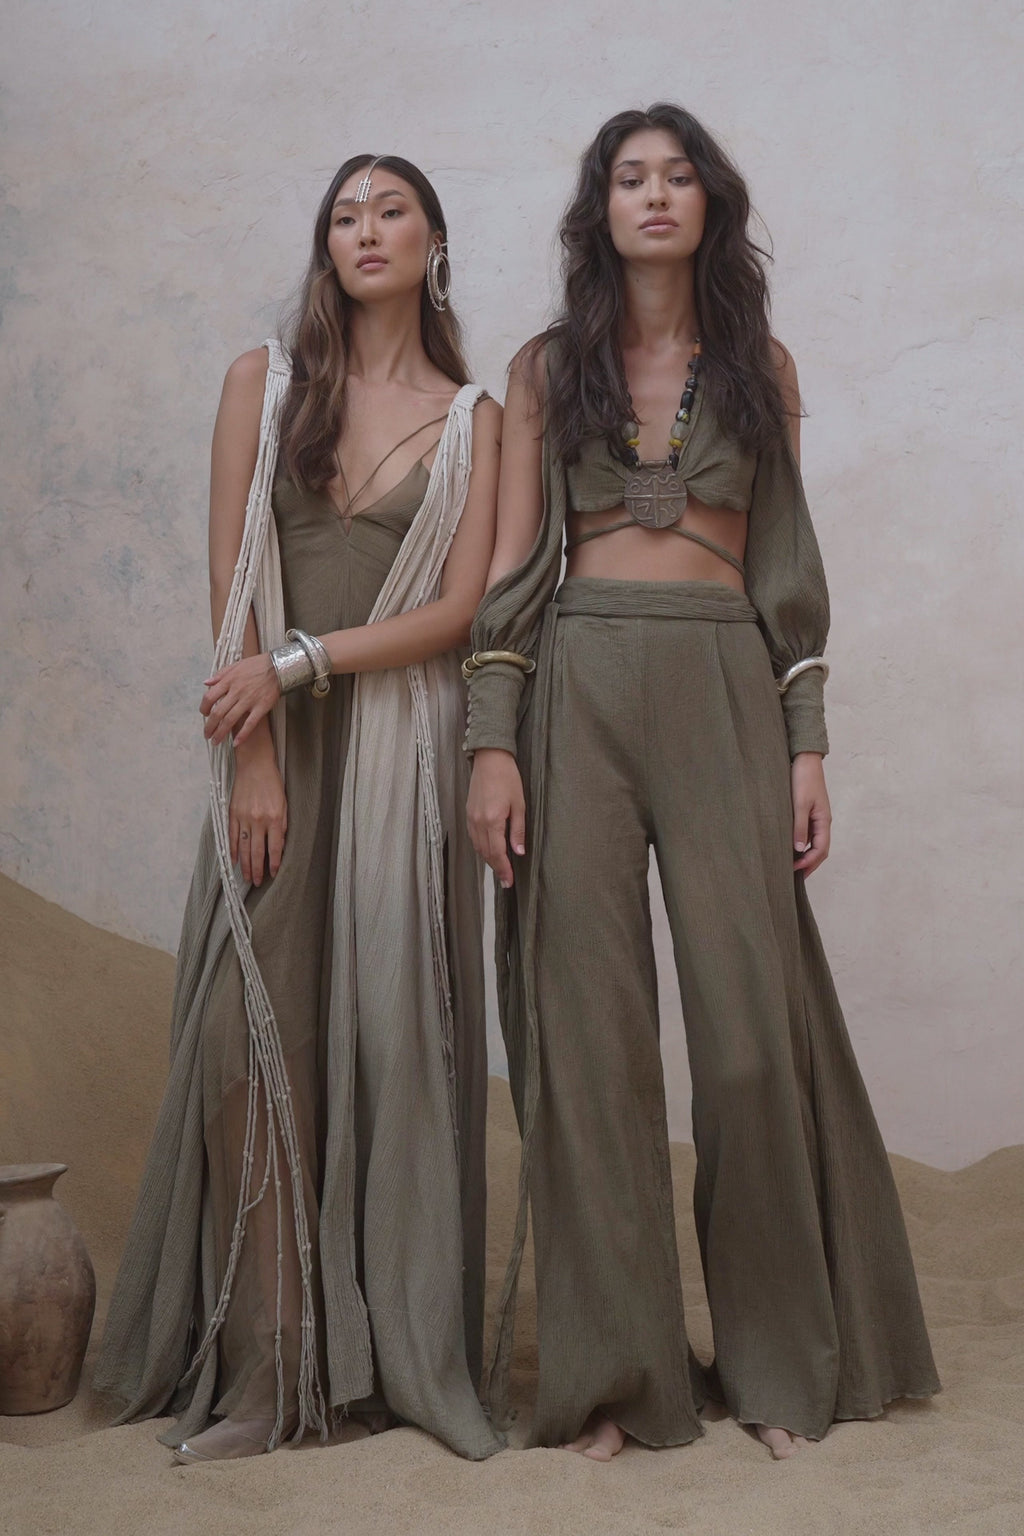 Check out Aya Sacred Wear's Sage Green Boho Crop Top and Pants for a trendy look.